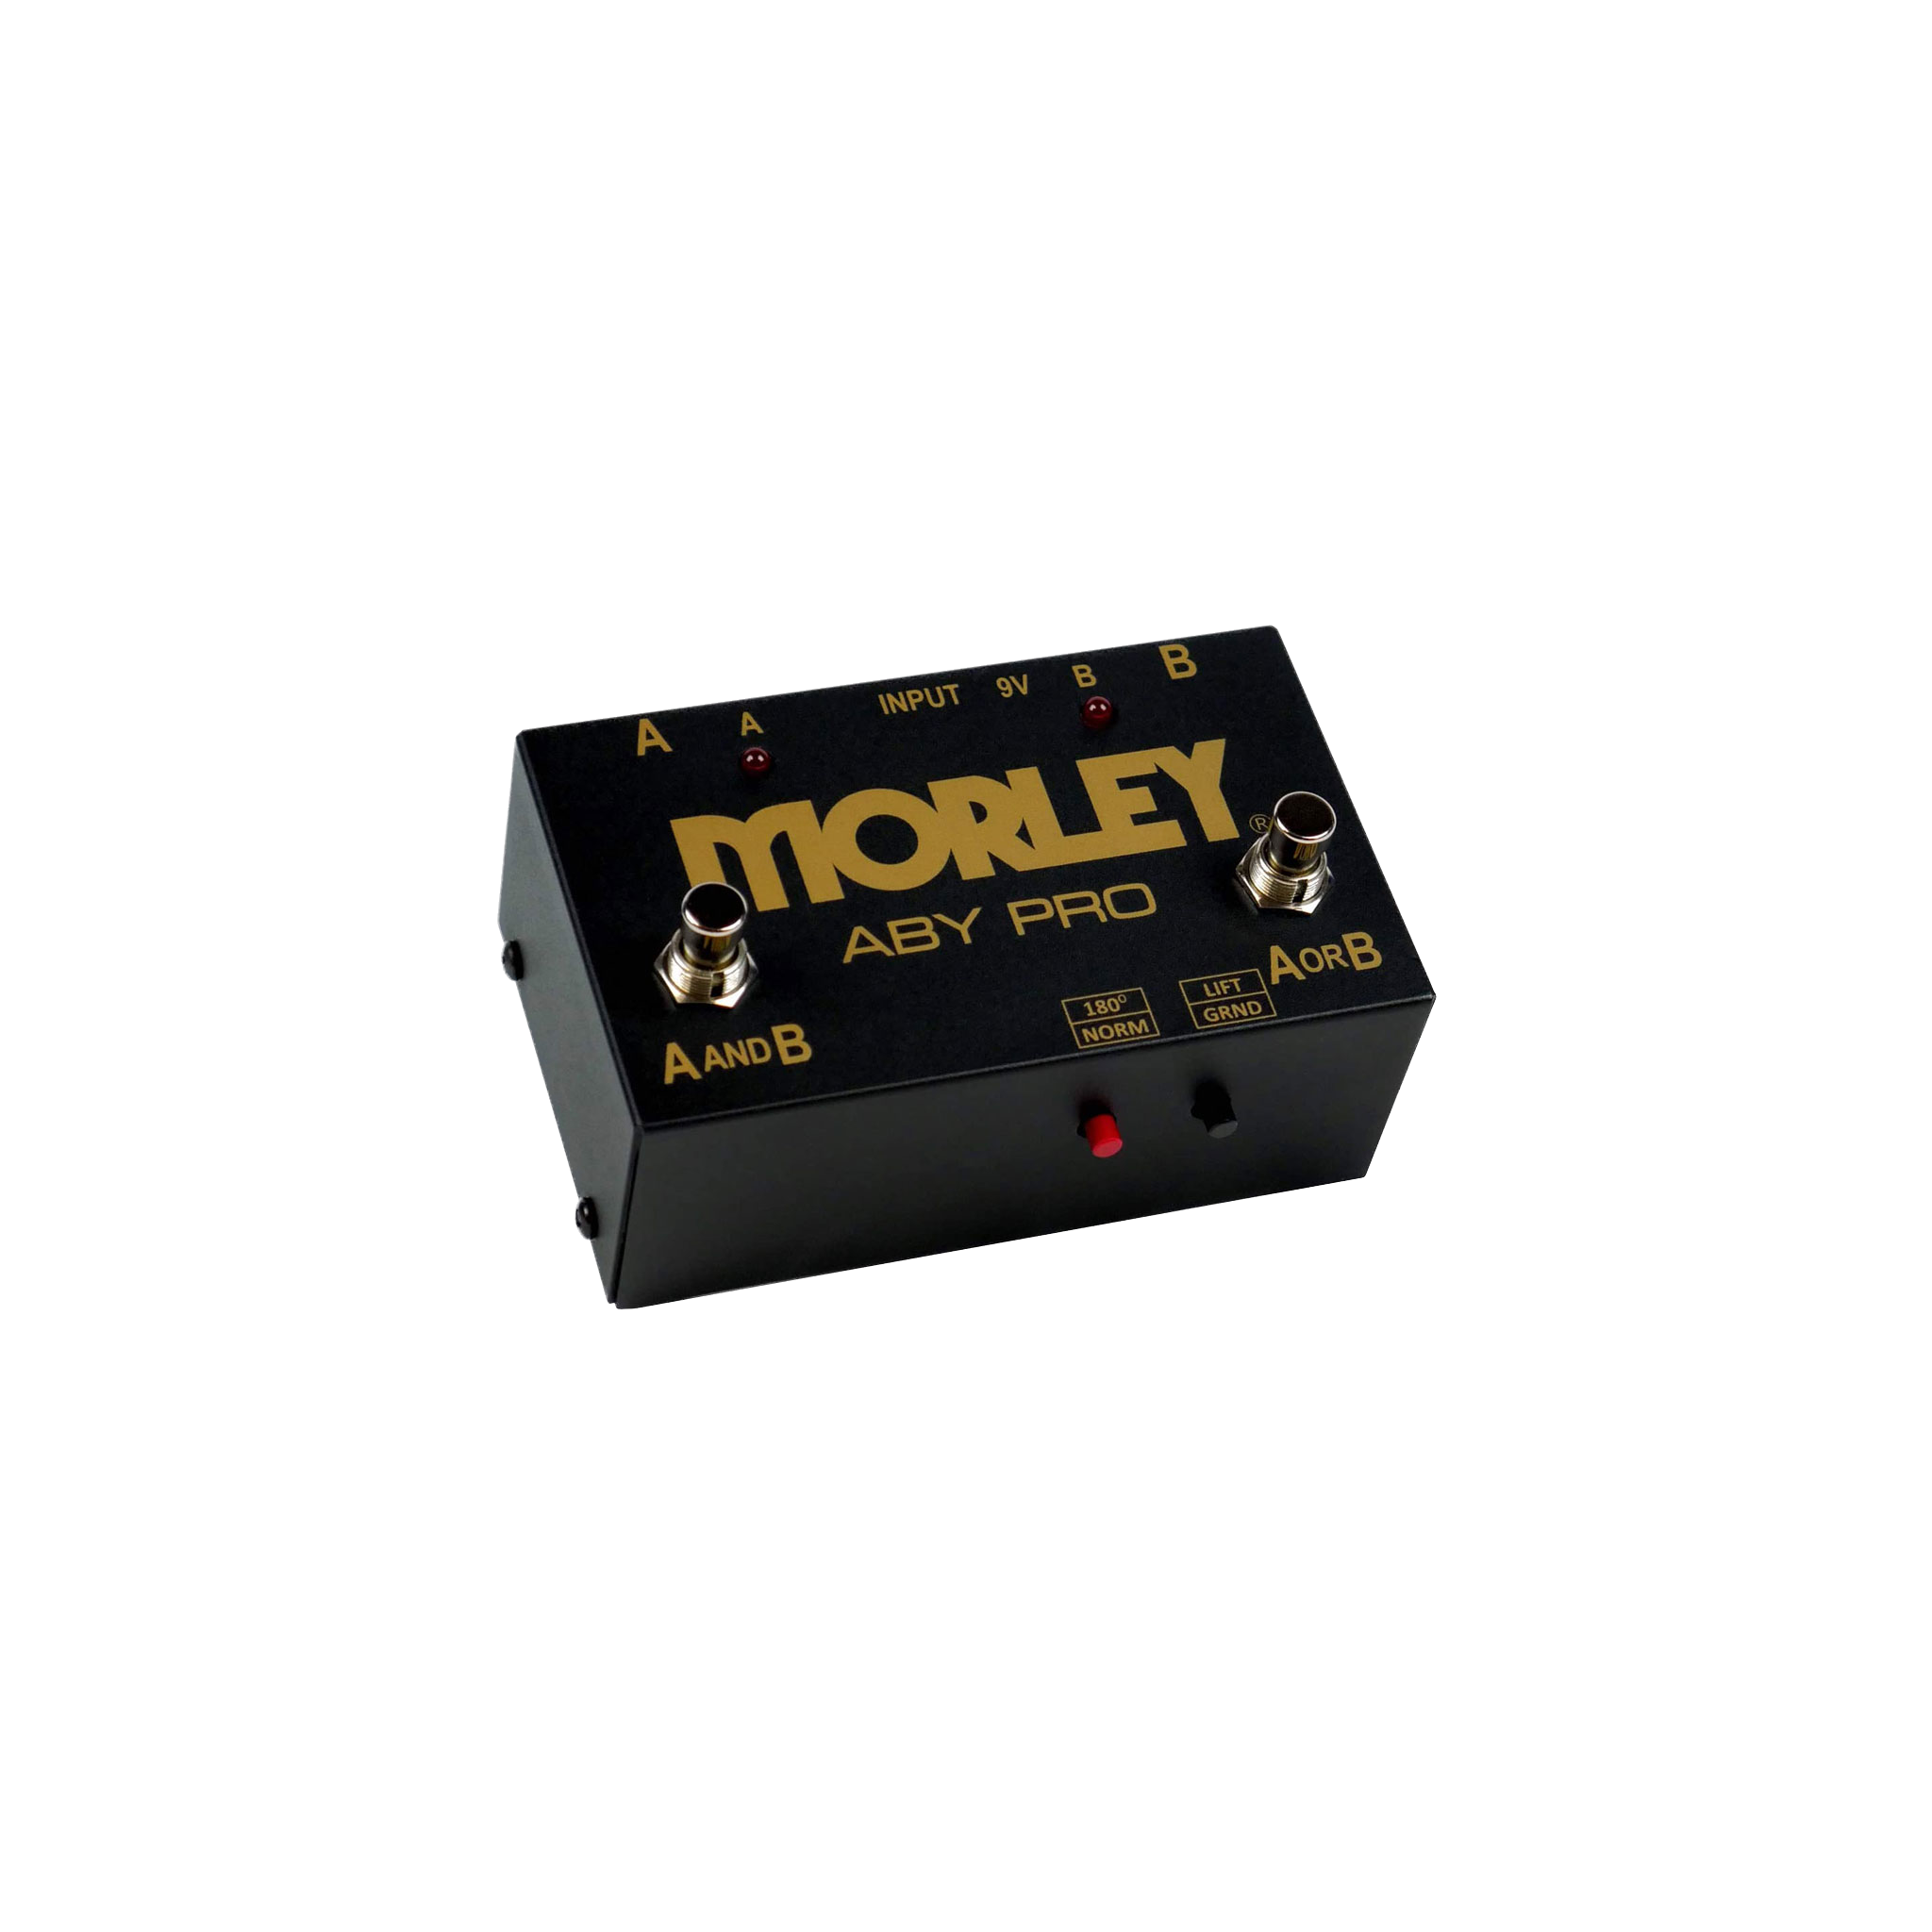 Morley ABY PRO 3-button Switcher/Combiner Pedal